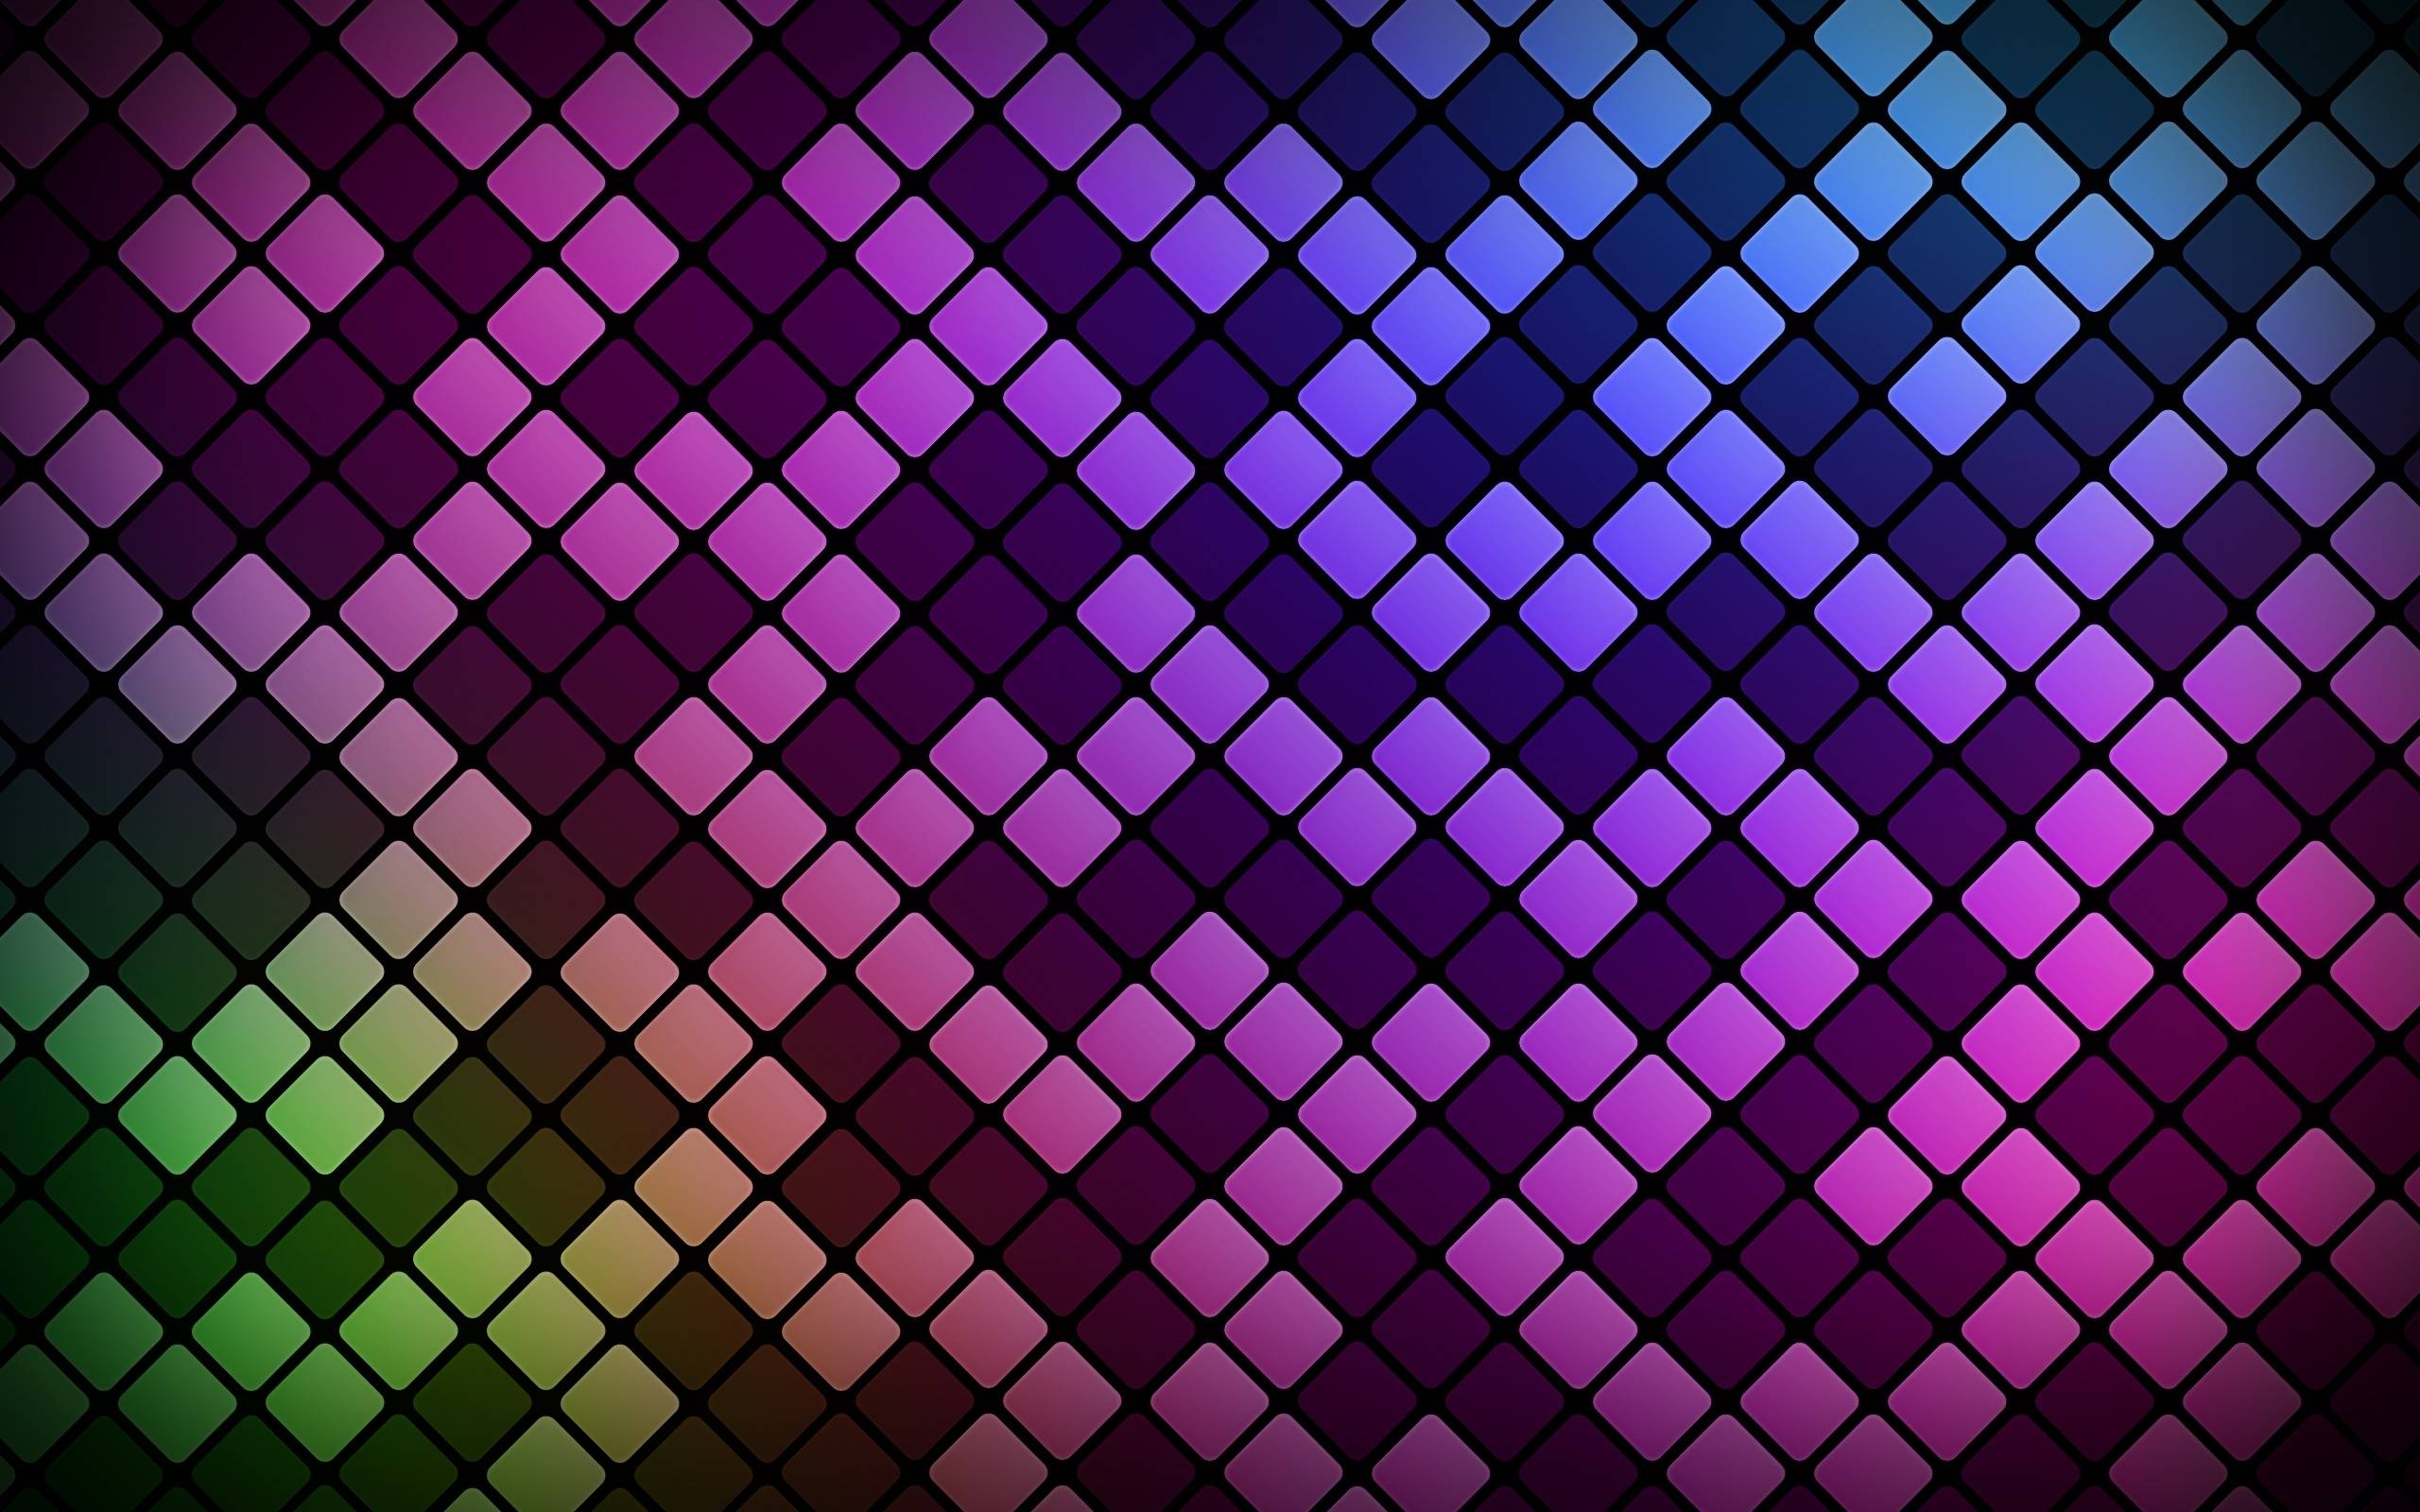 Abstract colorful background - Dark purple